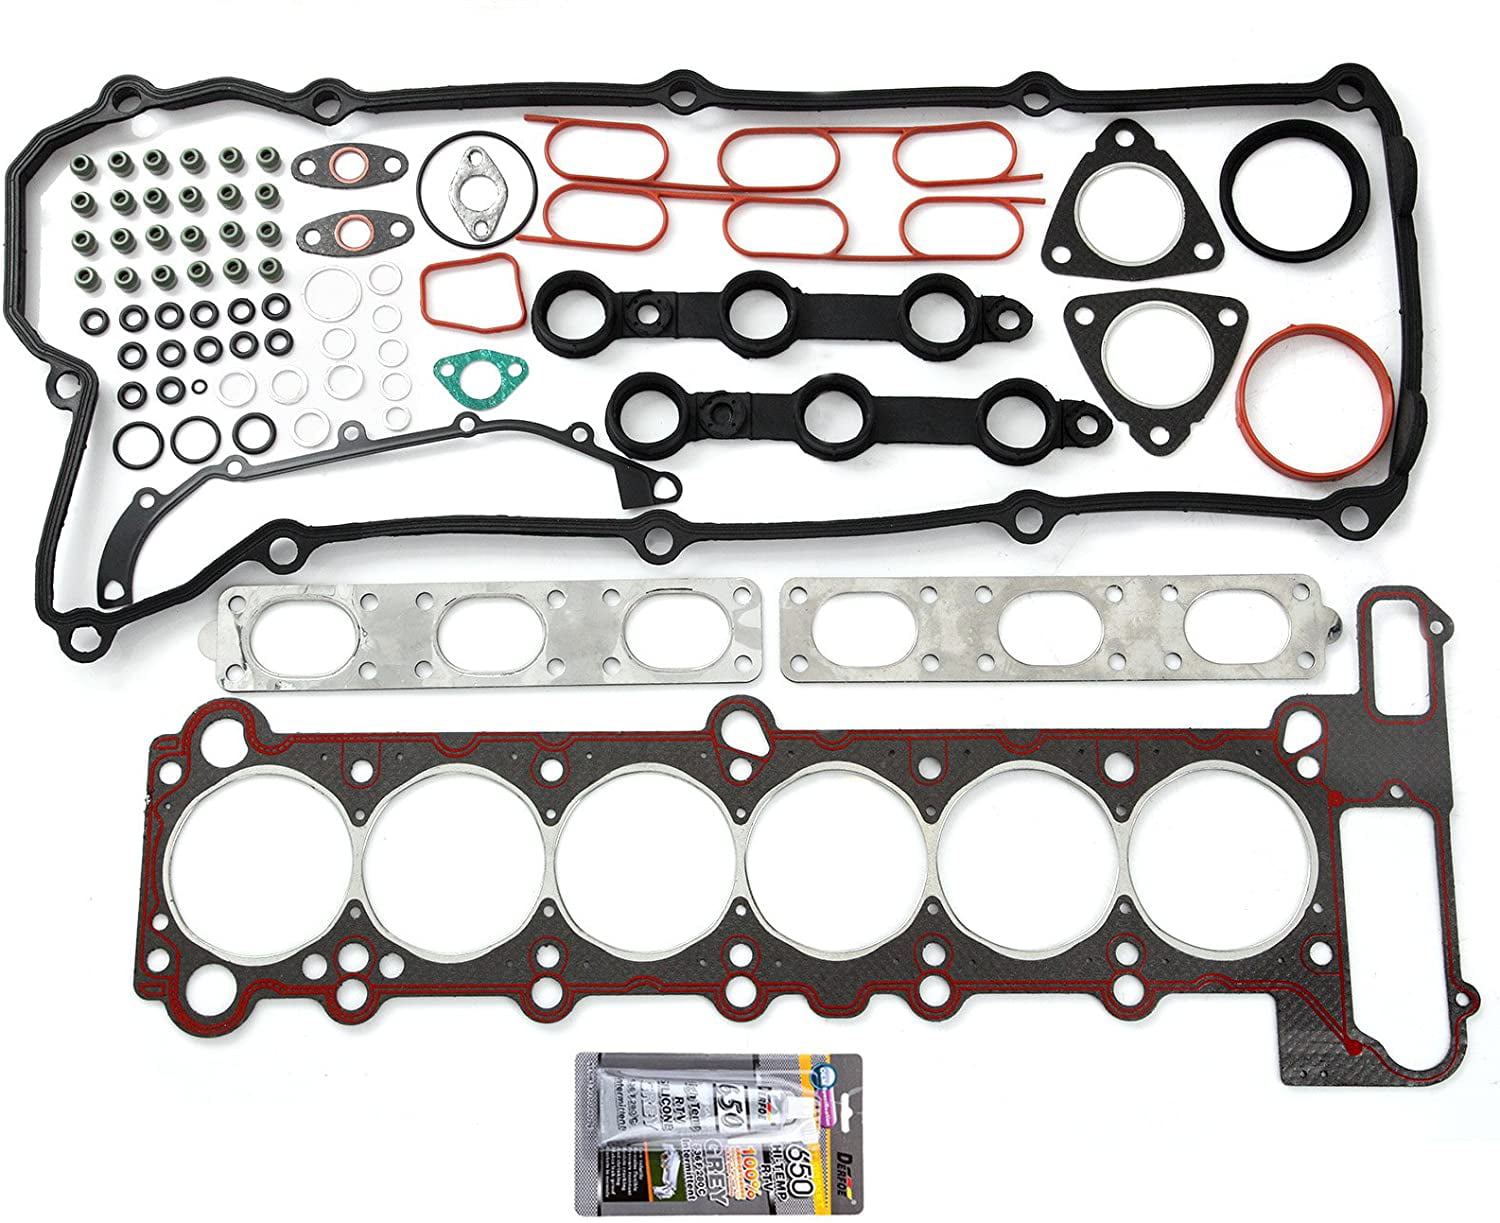 SCITOO Compatible with Head Gasket Kits Fits for BMW 323i 323is 328i 328is  528i Z3 2.5L 2.8L DOHC 1996-1999 Engine Valve Cover Gaskets Kit Set 